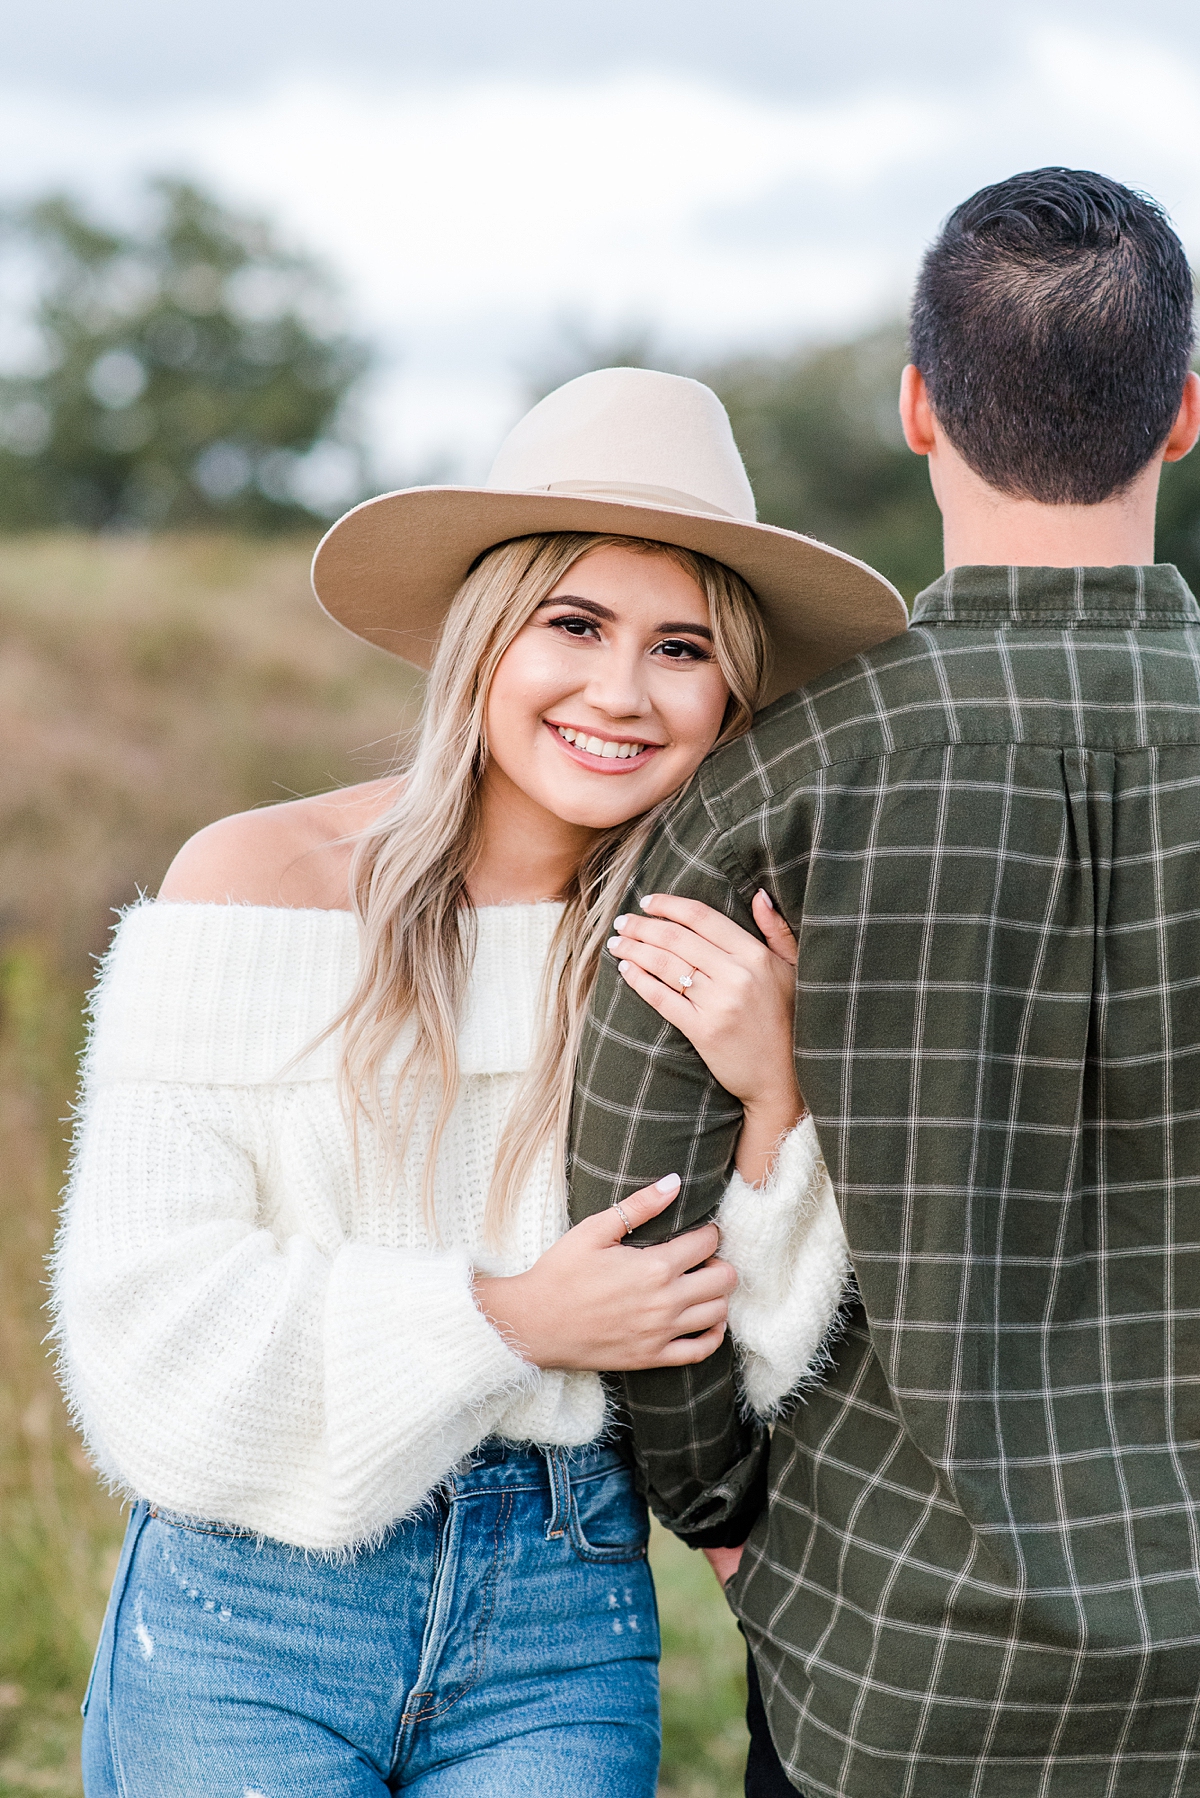 Stylish Engagement Outfit and Unique Poses with Engagement Ring at Yorktown Battlefield Fall Engagement Session. Engagement Photography by Virginia Beach Wedding Photographer Kailey Brianne Photography. 